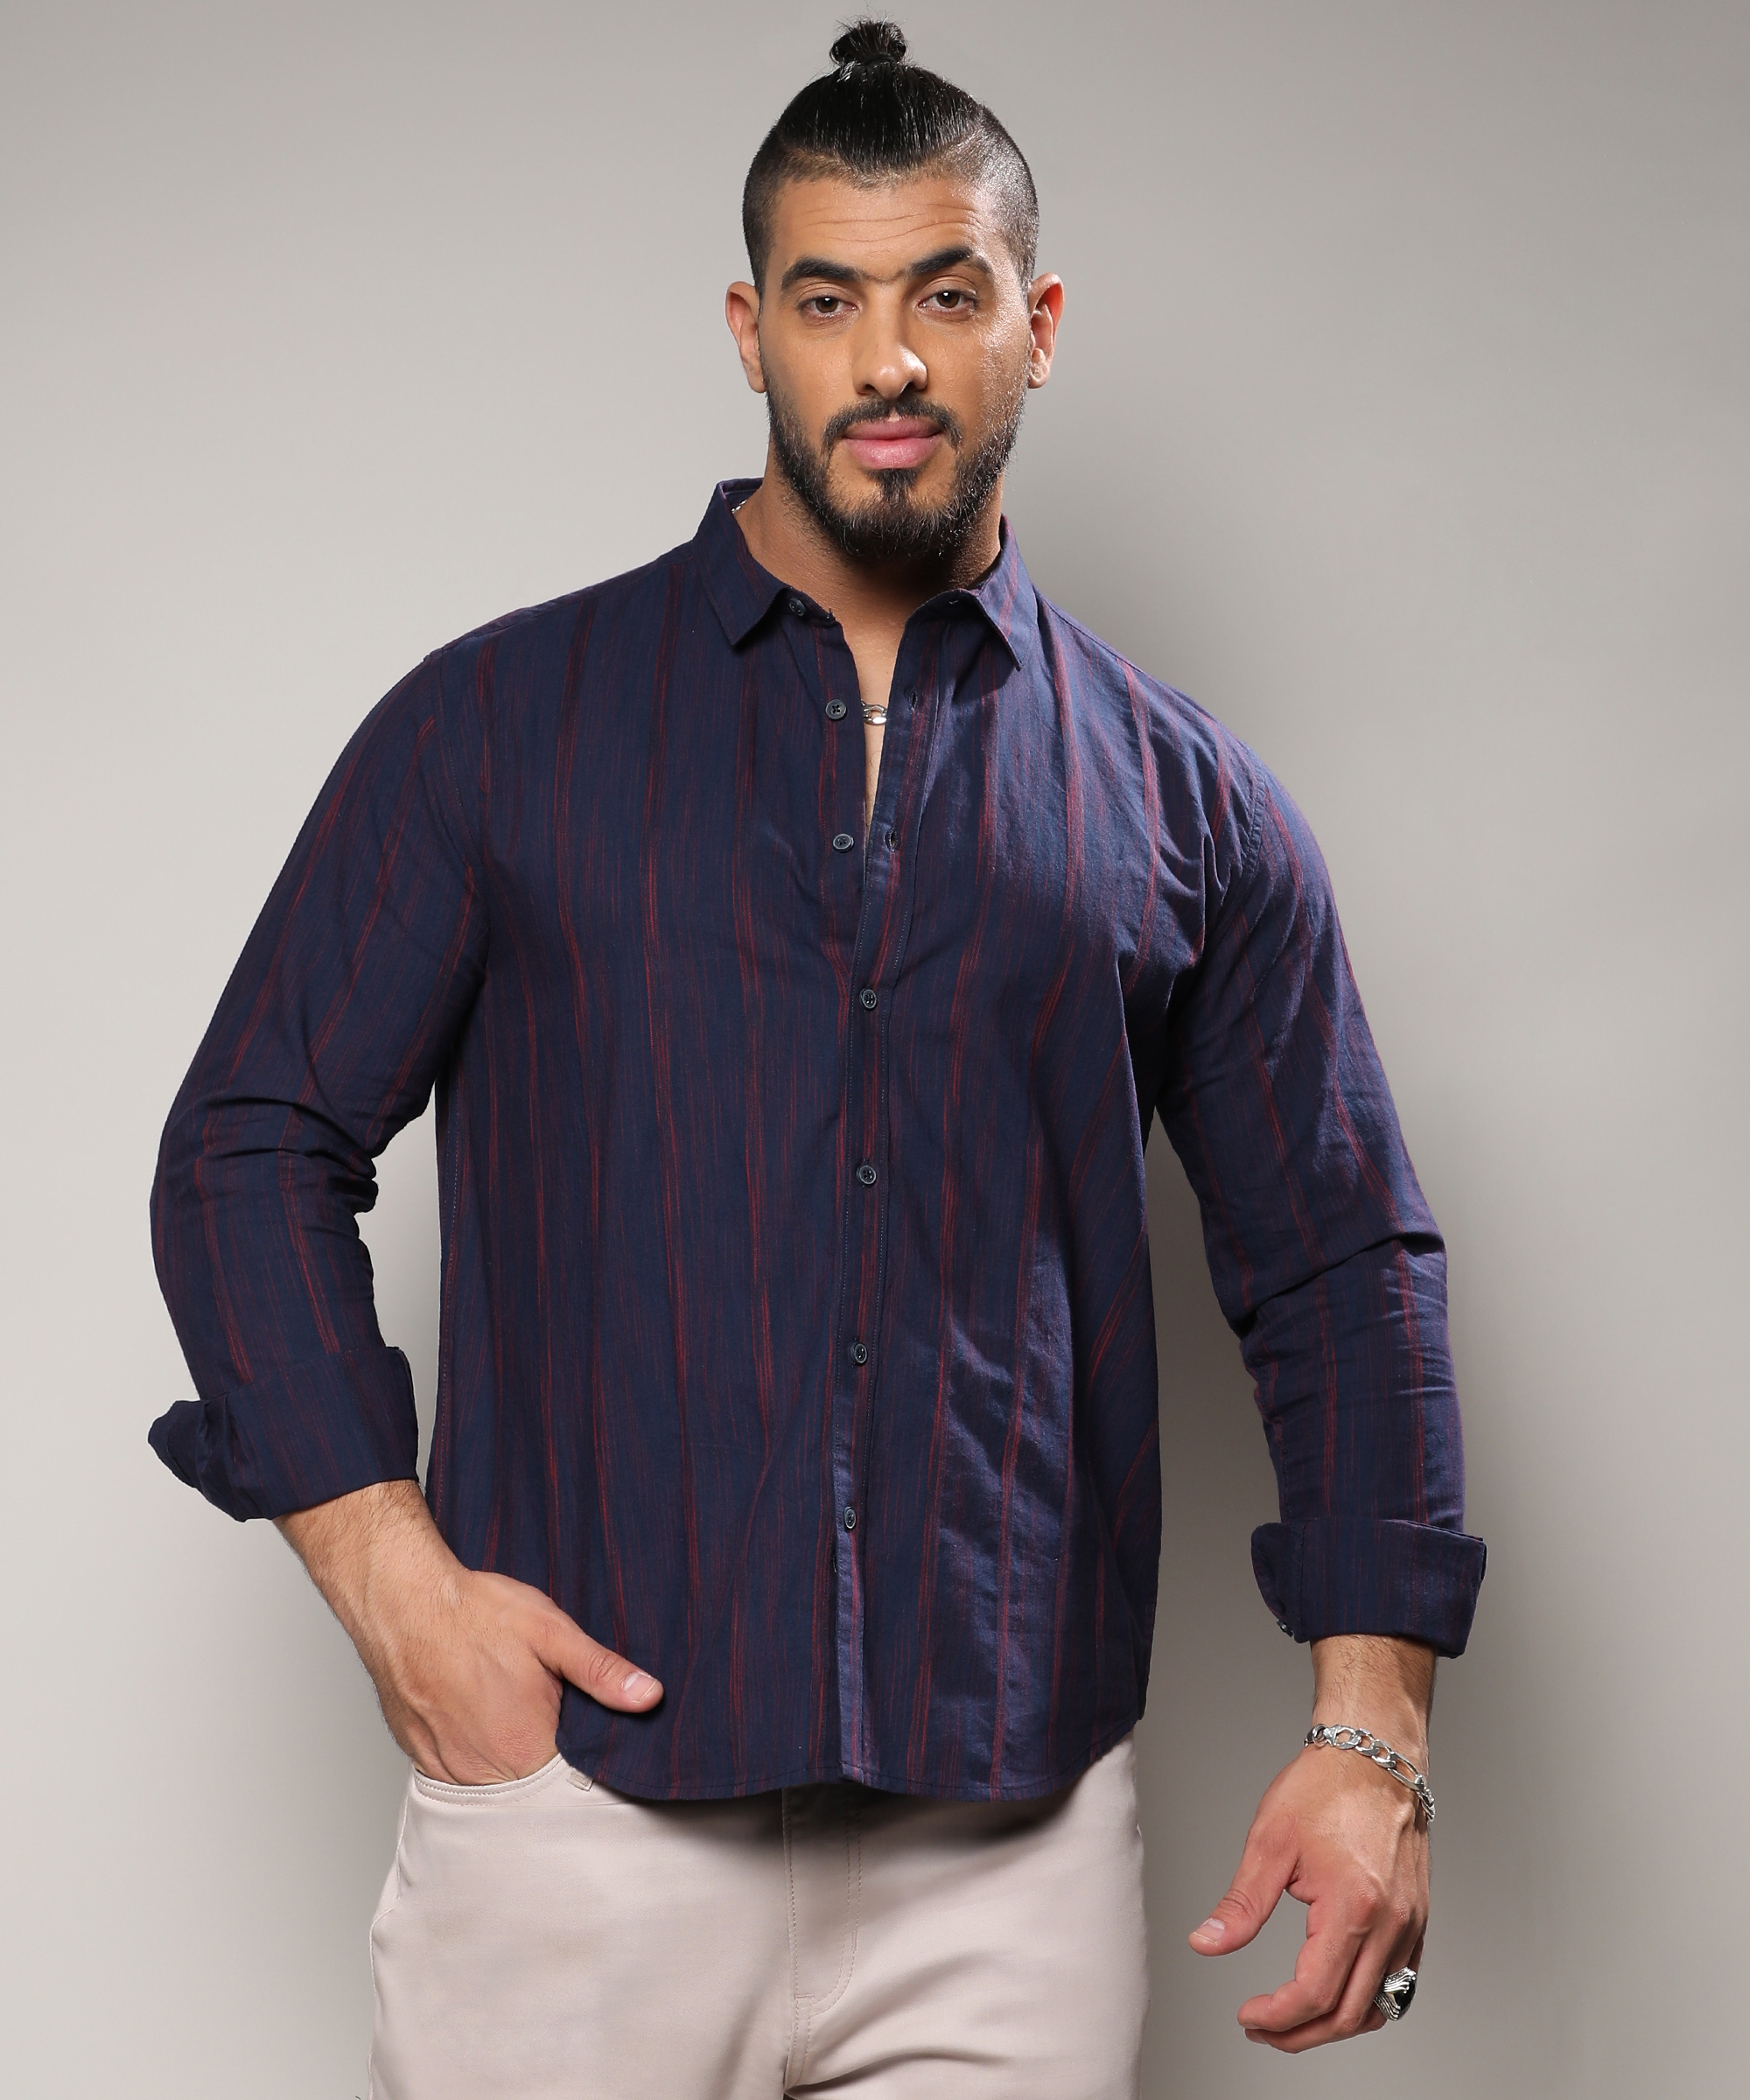 Instafab Plus | Men's Navy Blue & Red Ombre Striped Shirt